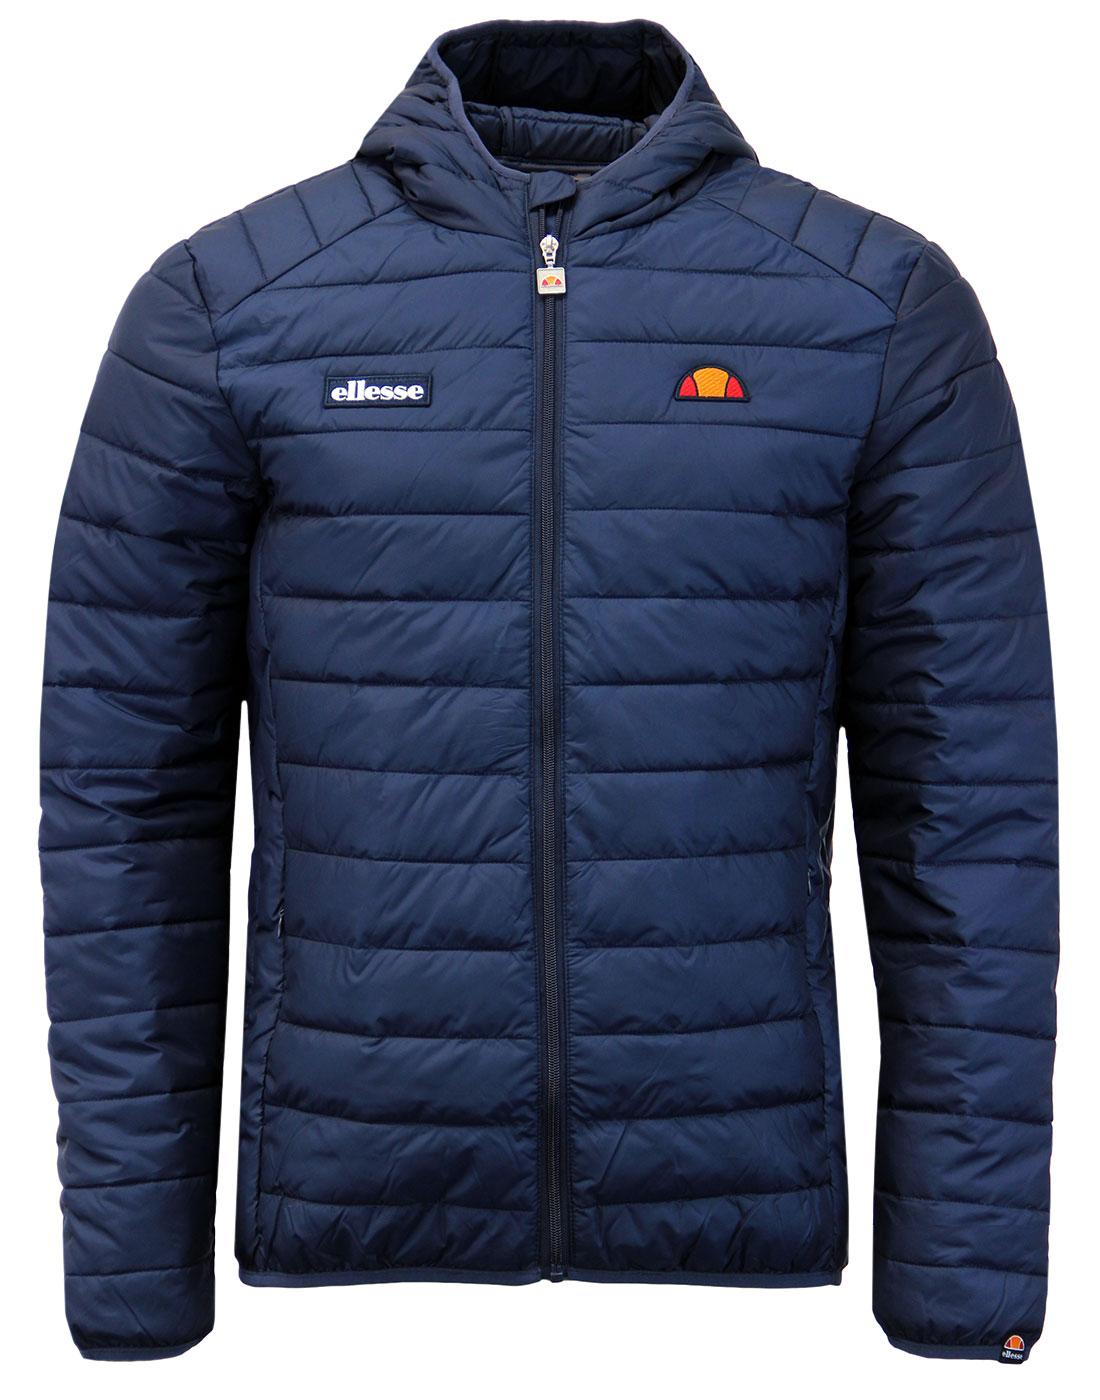 Lombardy ELLESSE Retro 70s Quilted Ski Jacket (DB)